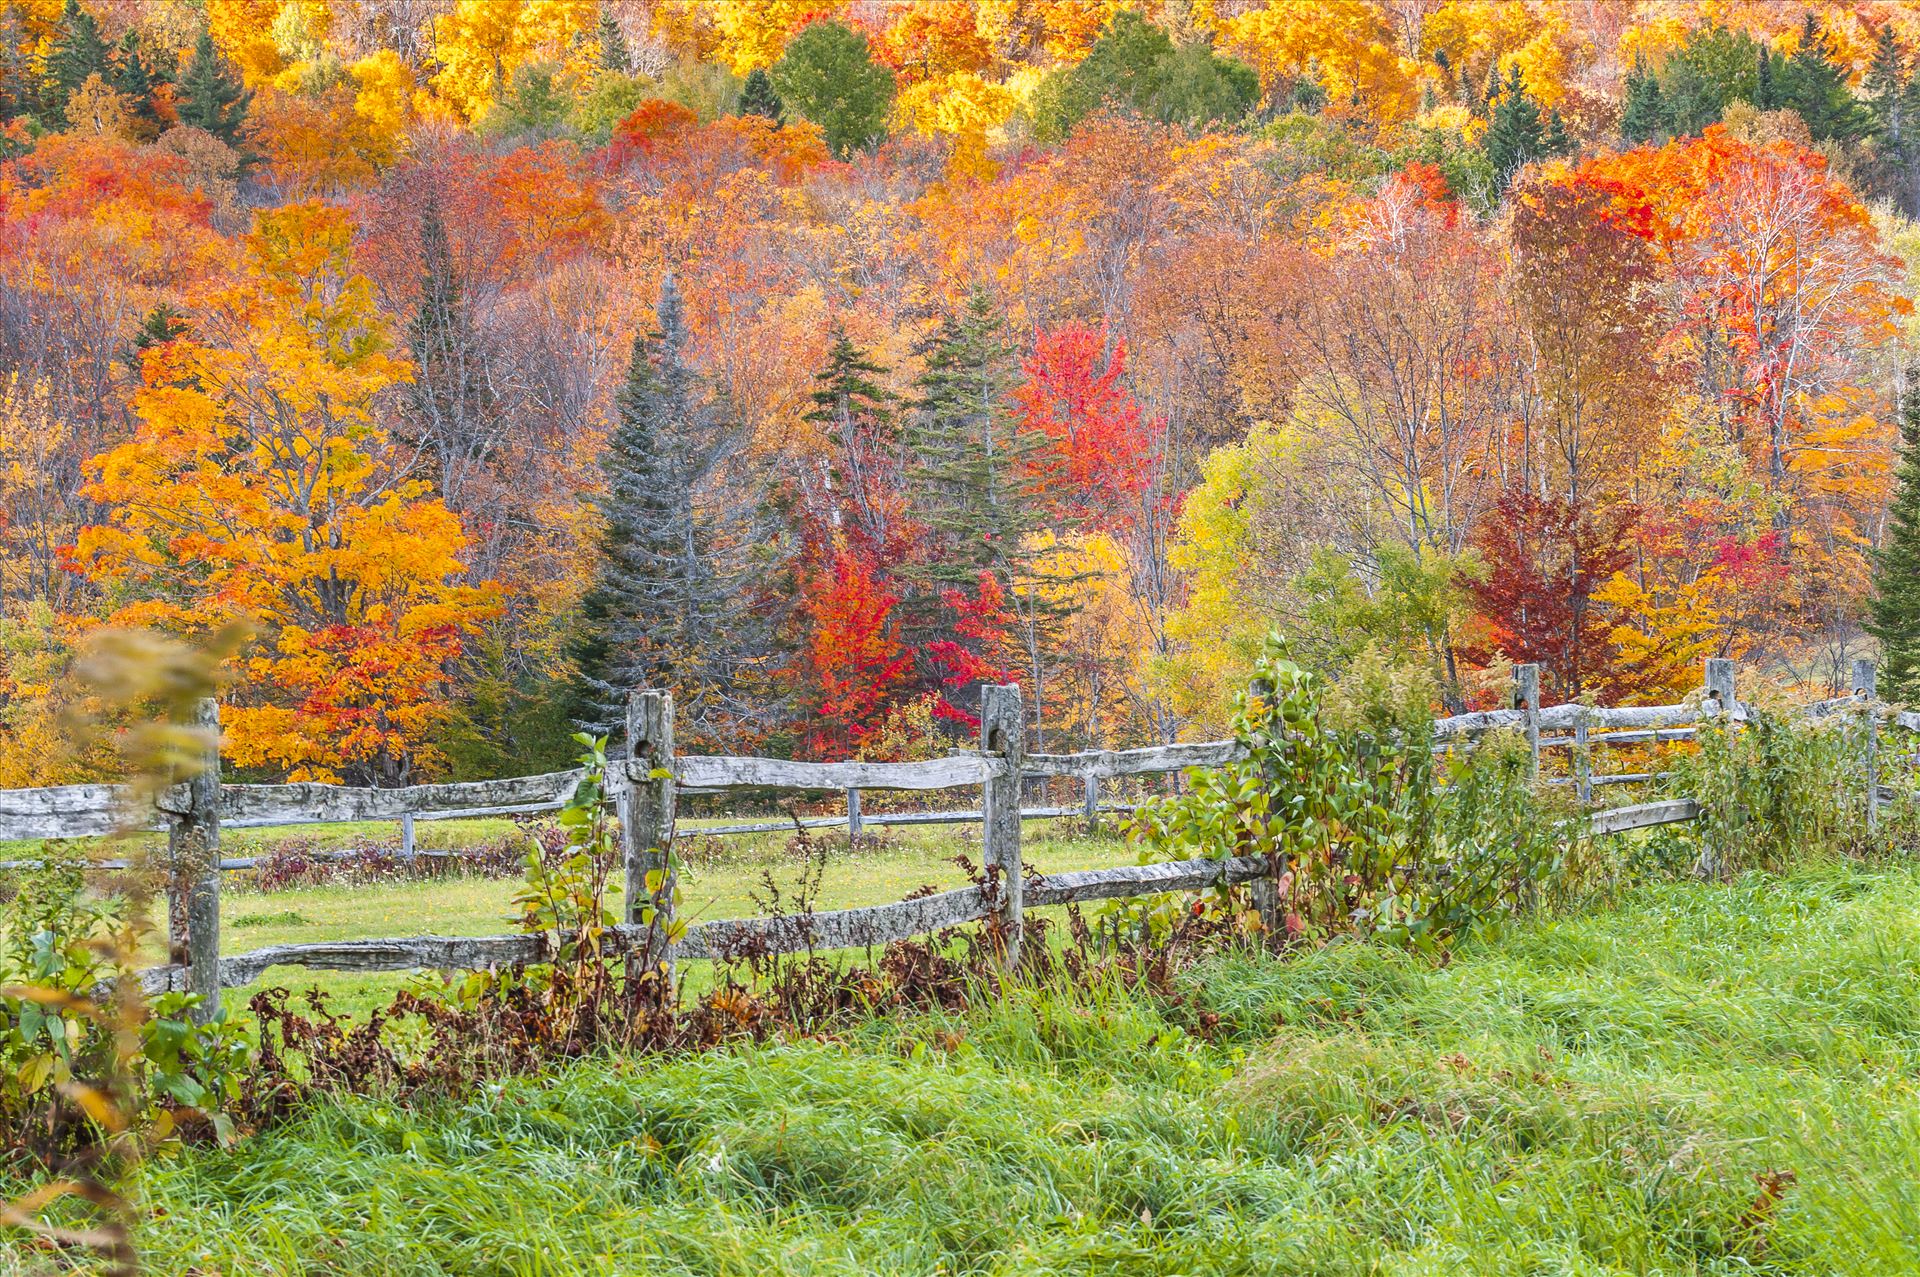 Fence in Foliage Vibrant Colors of Autumn in Vermont by Buckmaster